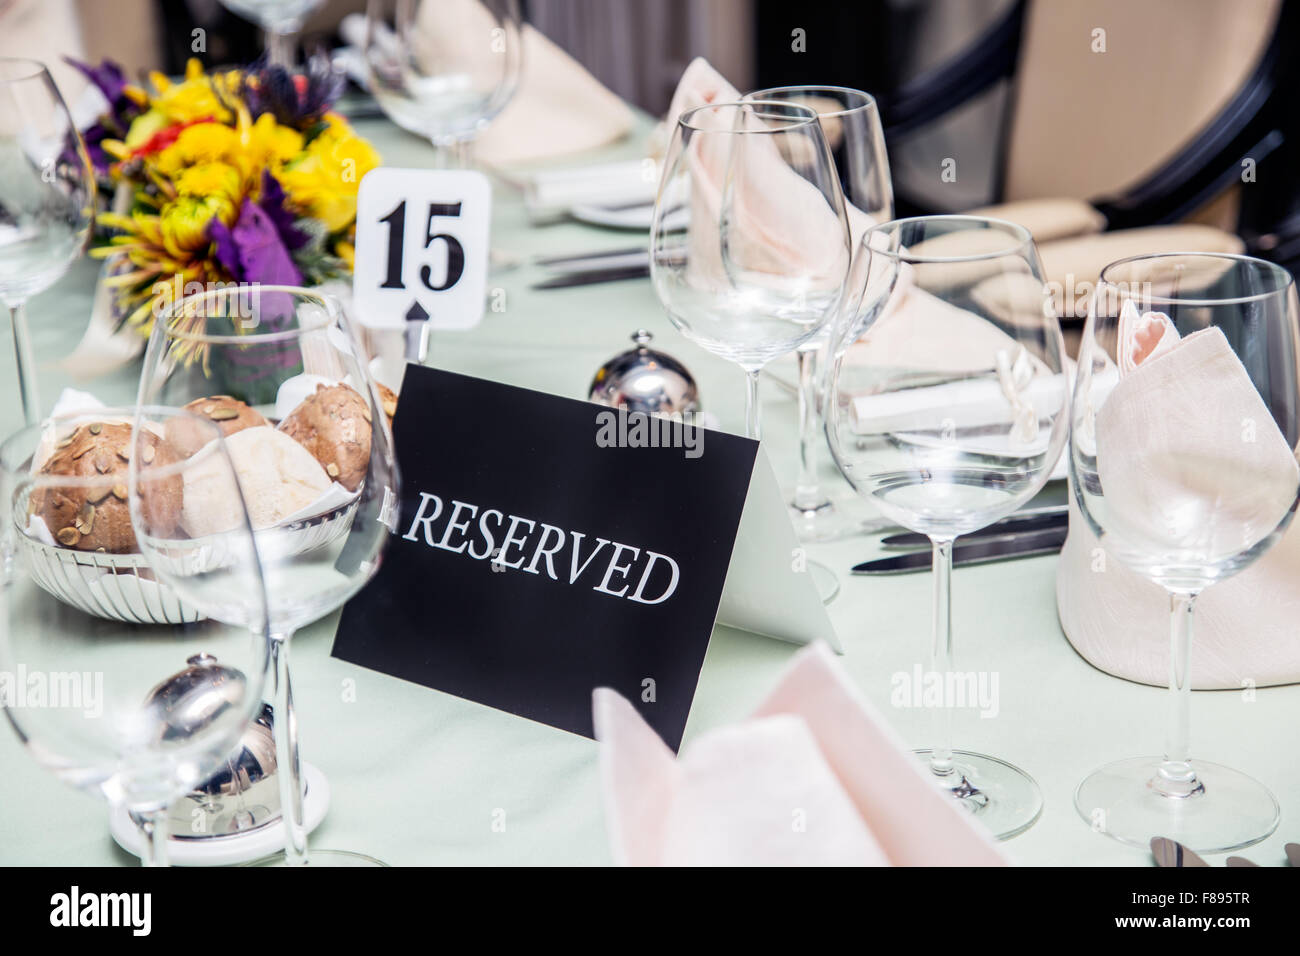 Festival dinner setting and 'Reserved' sign. Stock Photo